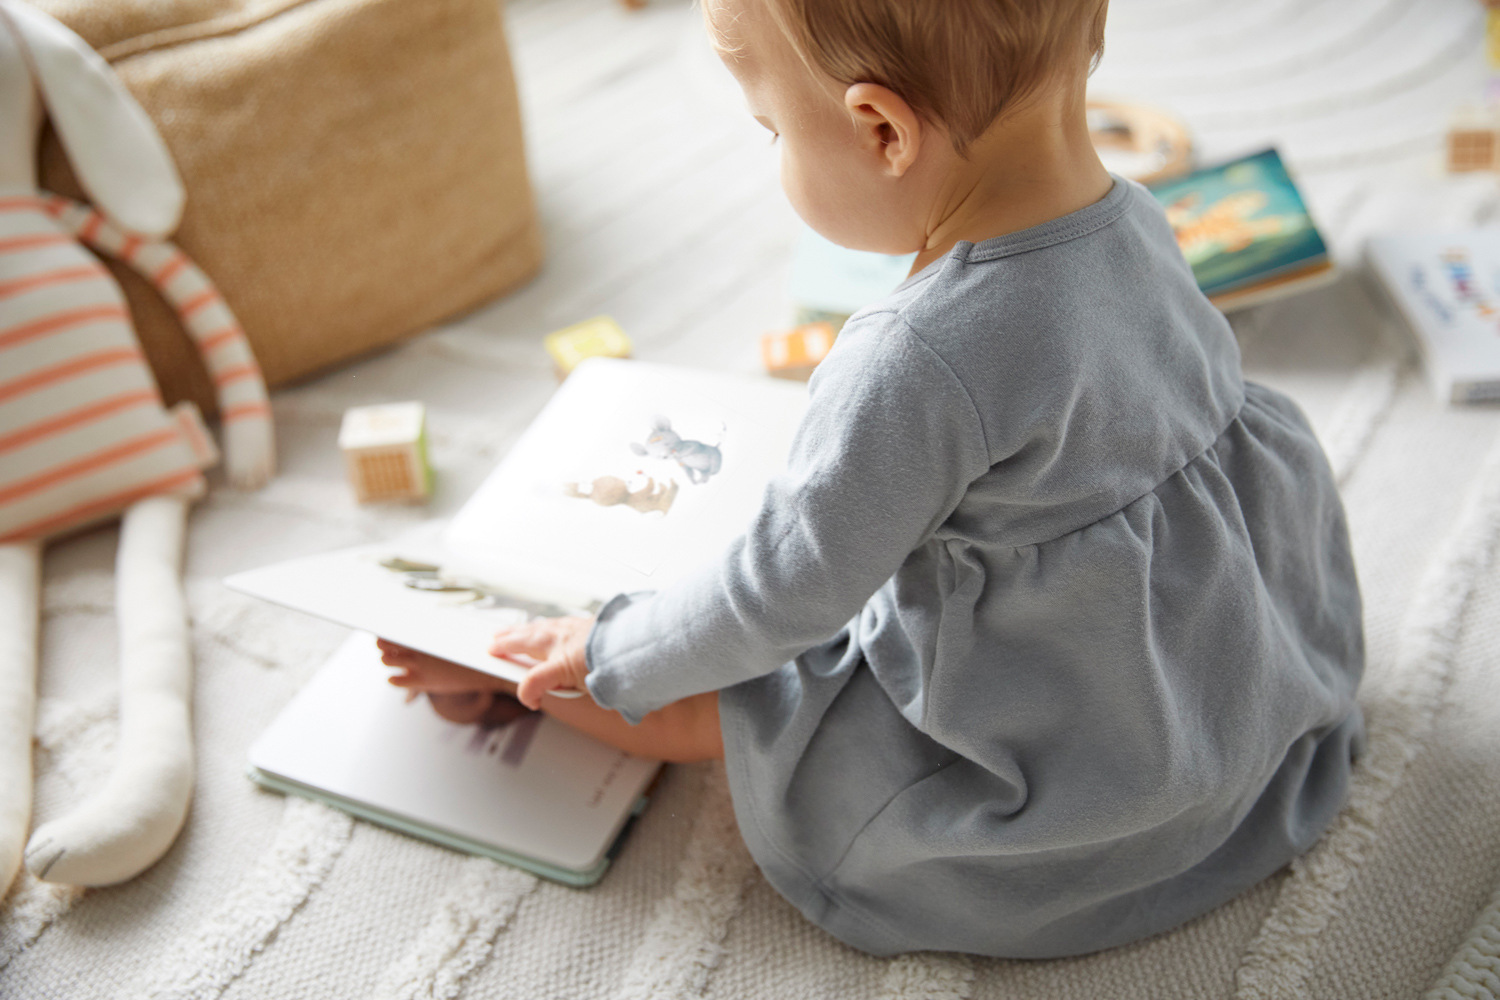 Baby reading a board book by lifestyle photographer Buff Strickland